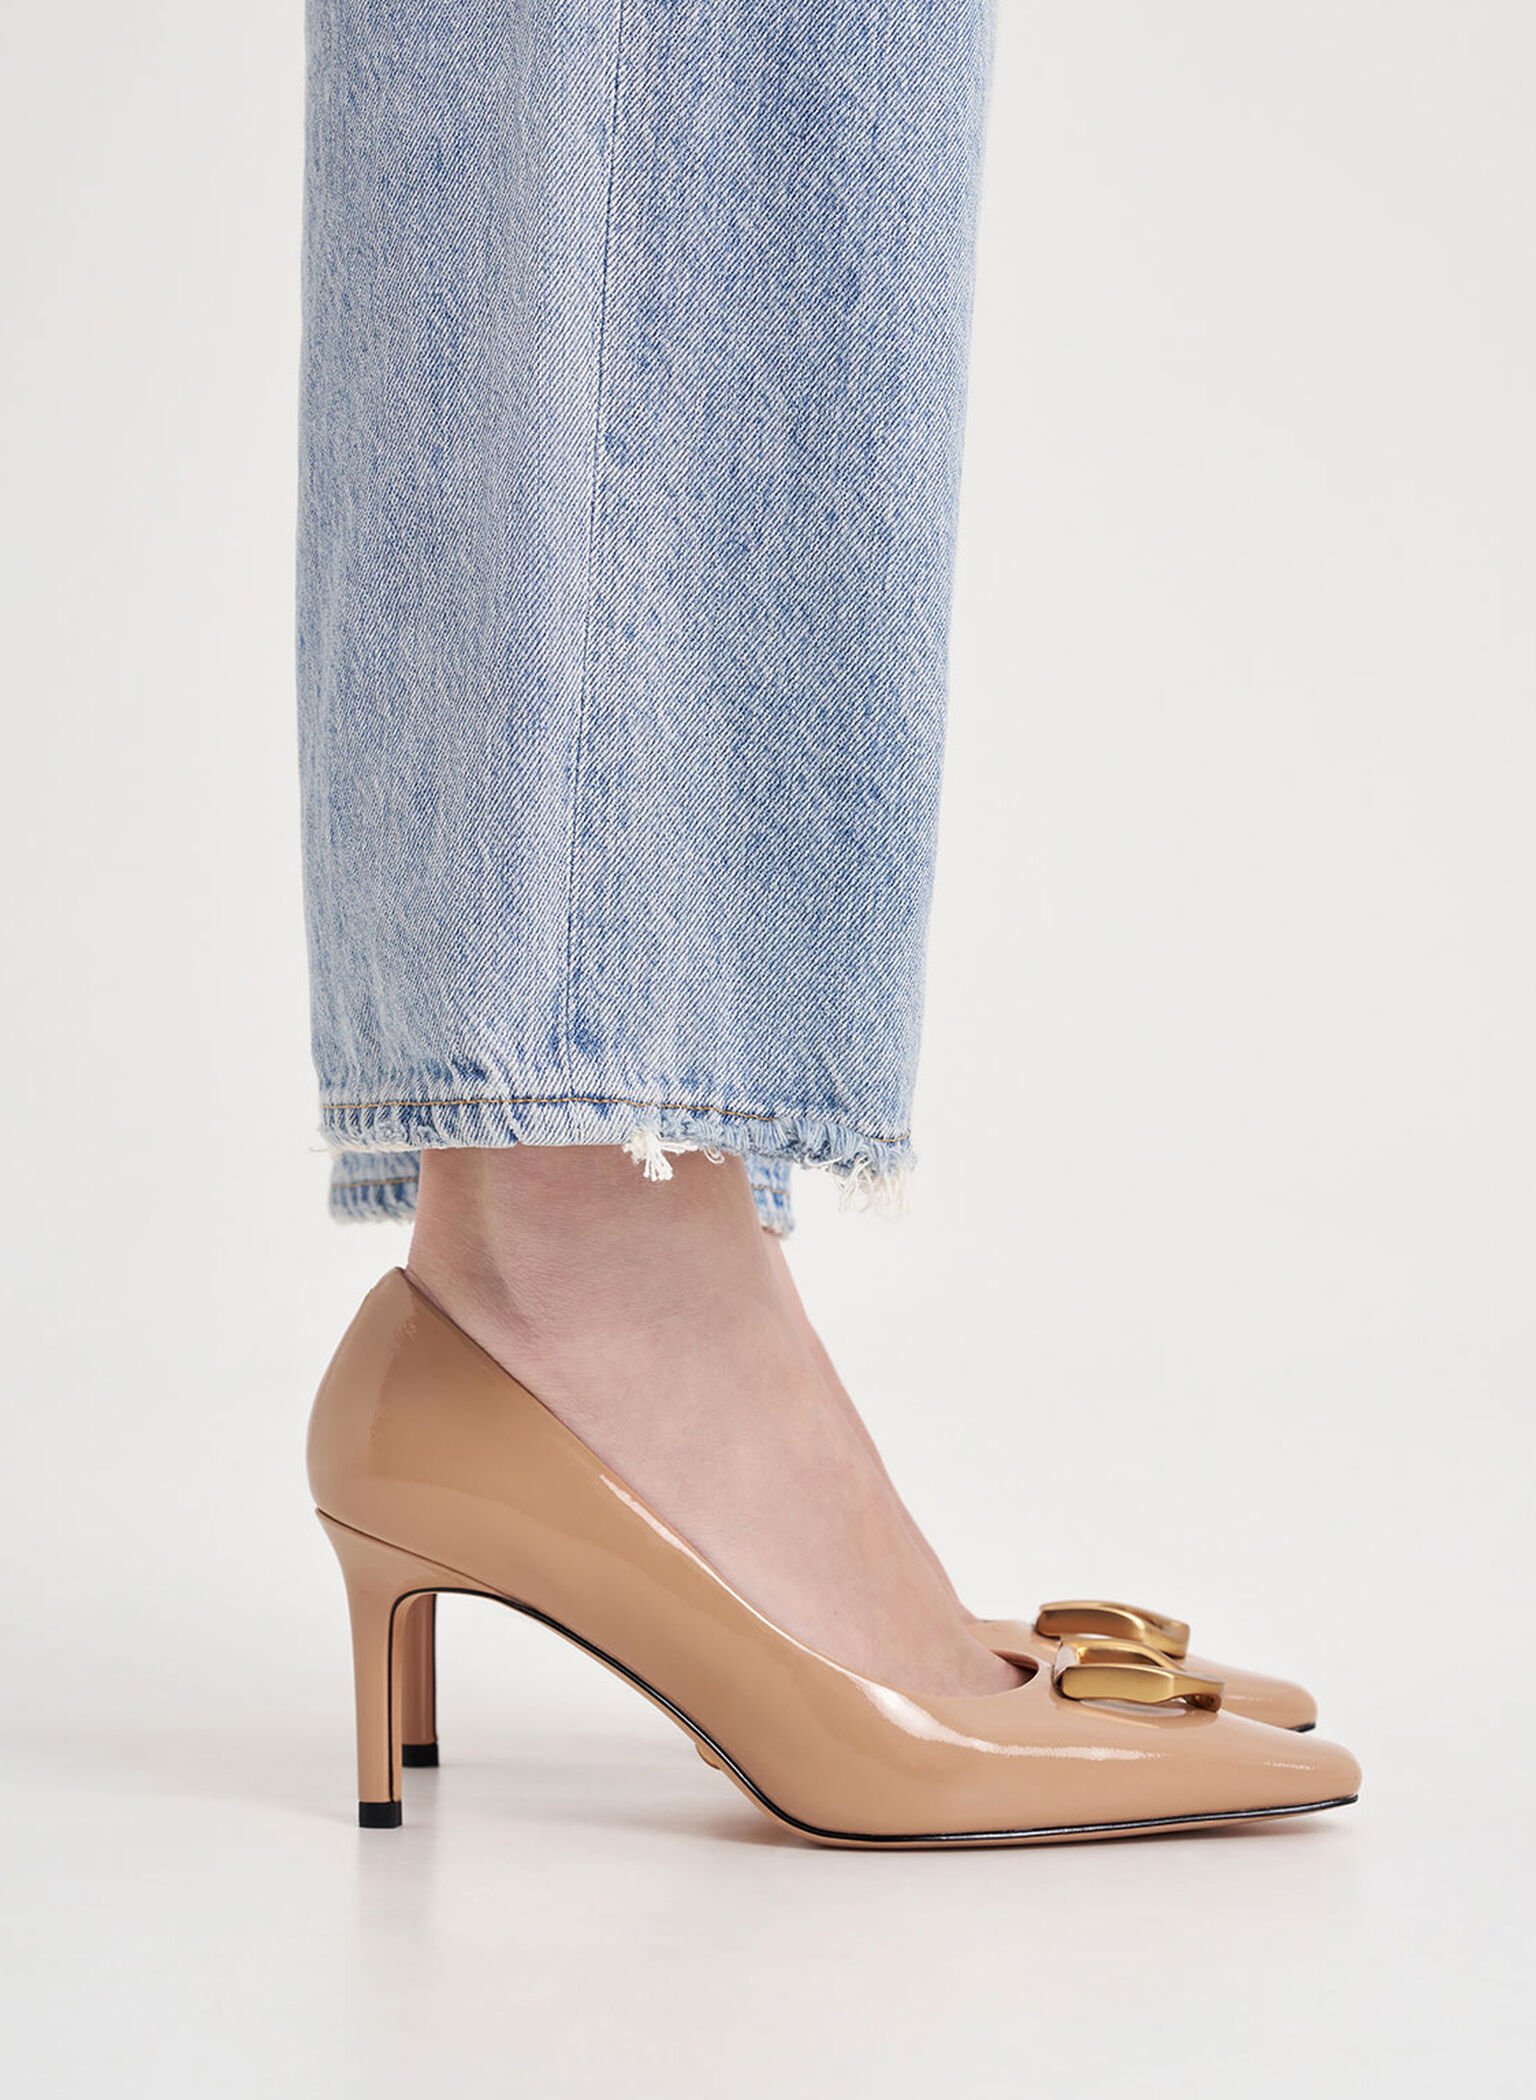 Gabine Patent Leather Tapered Pumps, Nude, hi-res